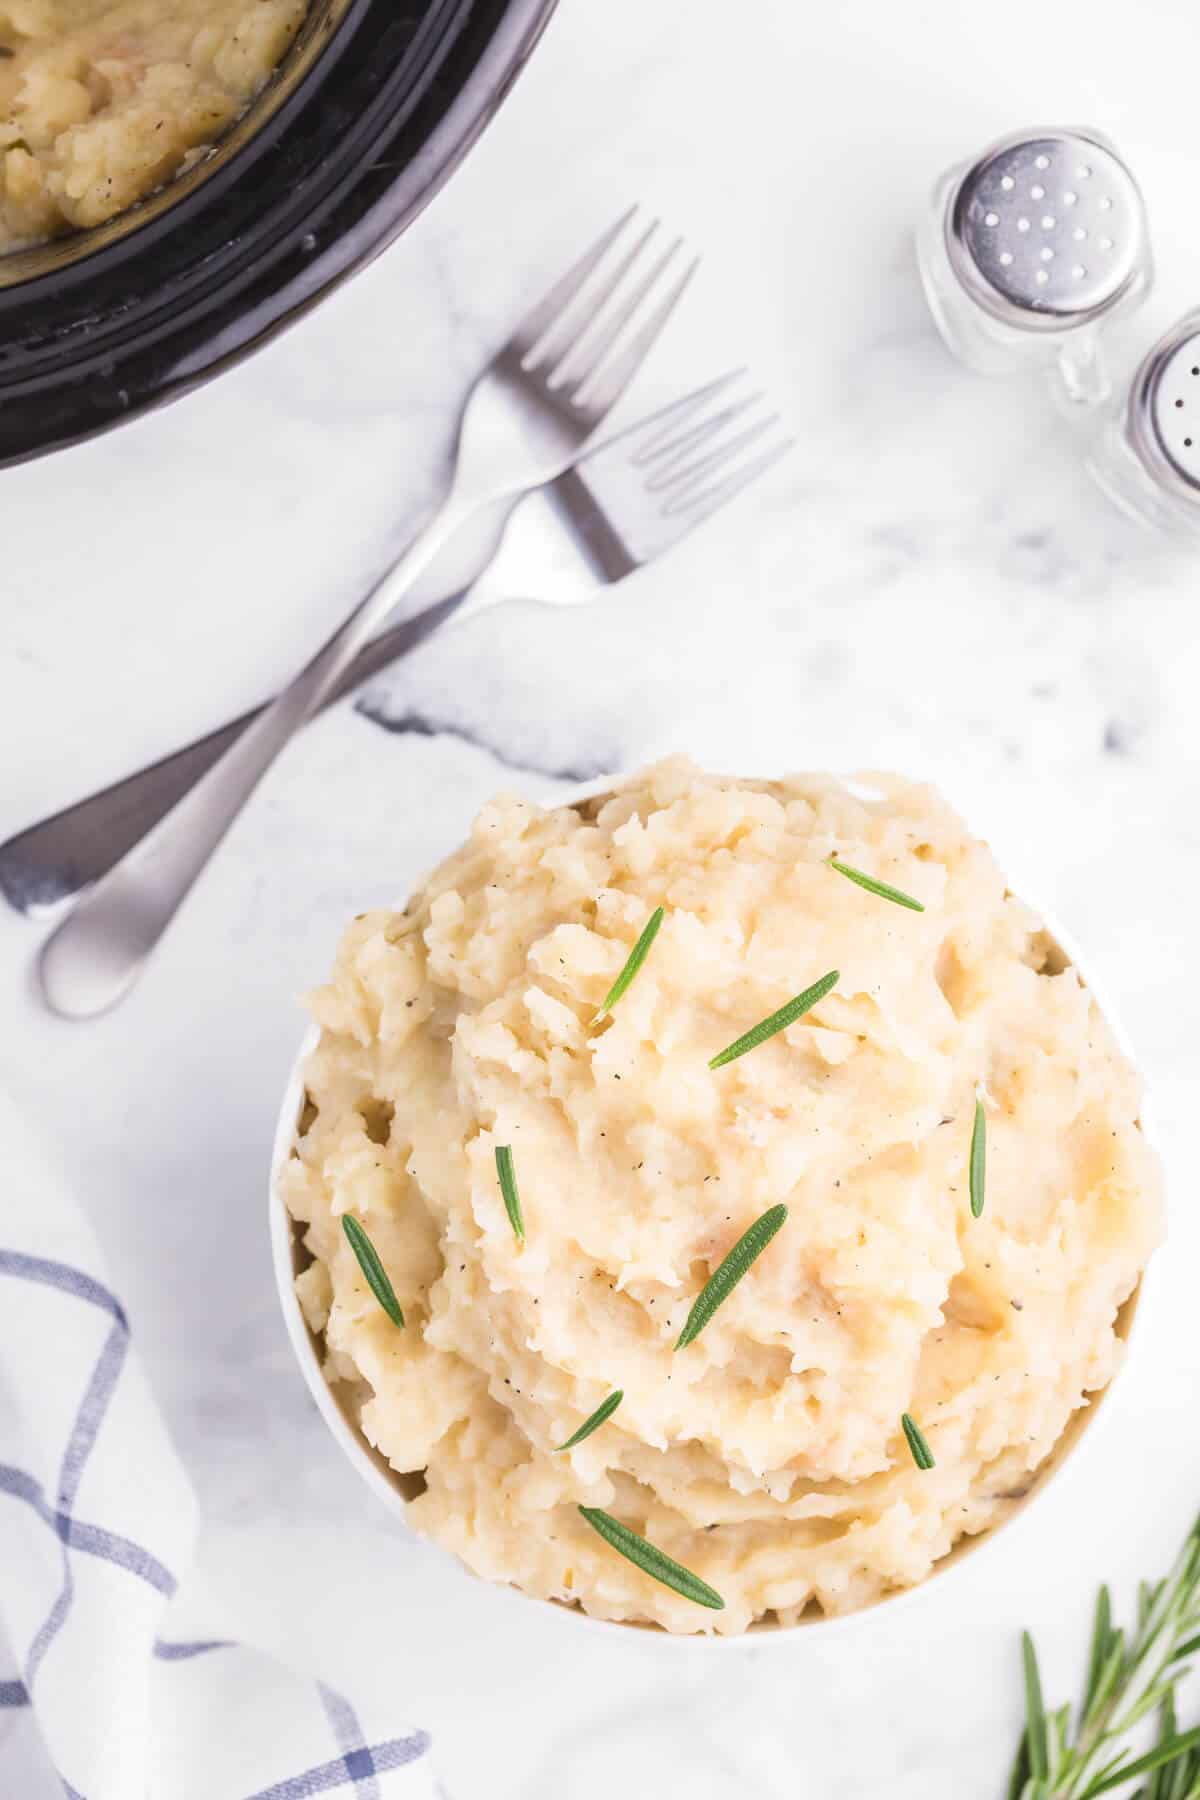 Slow Cooker Rosemary Garlic Mashed Potatoes - Make the creamiest mashed potatoes in your Crockpot! You'll love the rich, garlicky flavor in every bite for a delicious fall side dish.